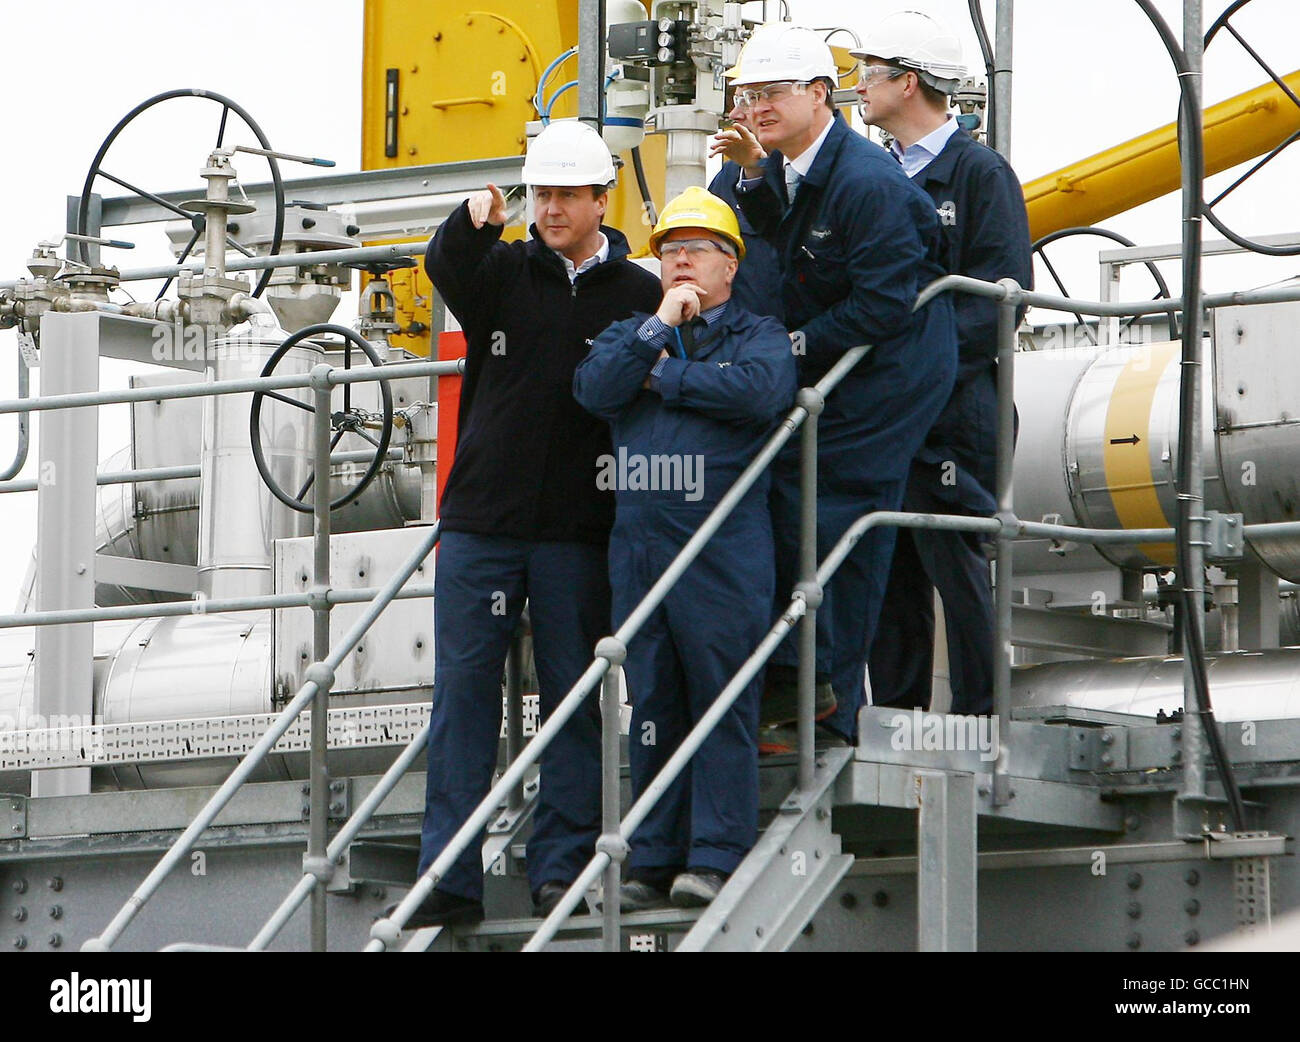 Conservative Party Leader David Cameron (left) is shown around the National Grid Grain LNG site in Grain, Kent, by Director of National Grid LNG, Peter Boreham (centre front) and Steve Holliday (right) C.E.O of National Grid as the Conservative Party launch their Energy Security Green Paper. Stock Photo